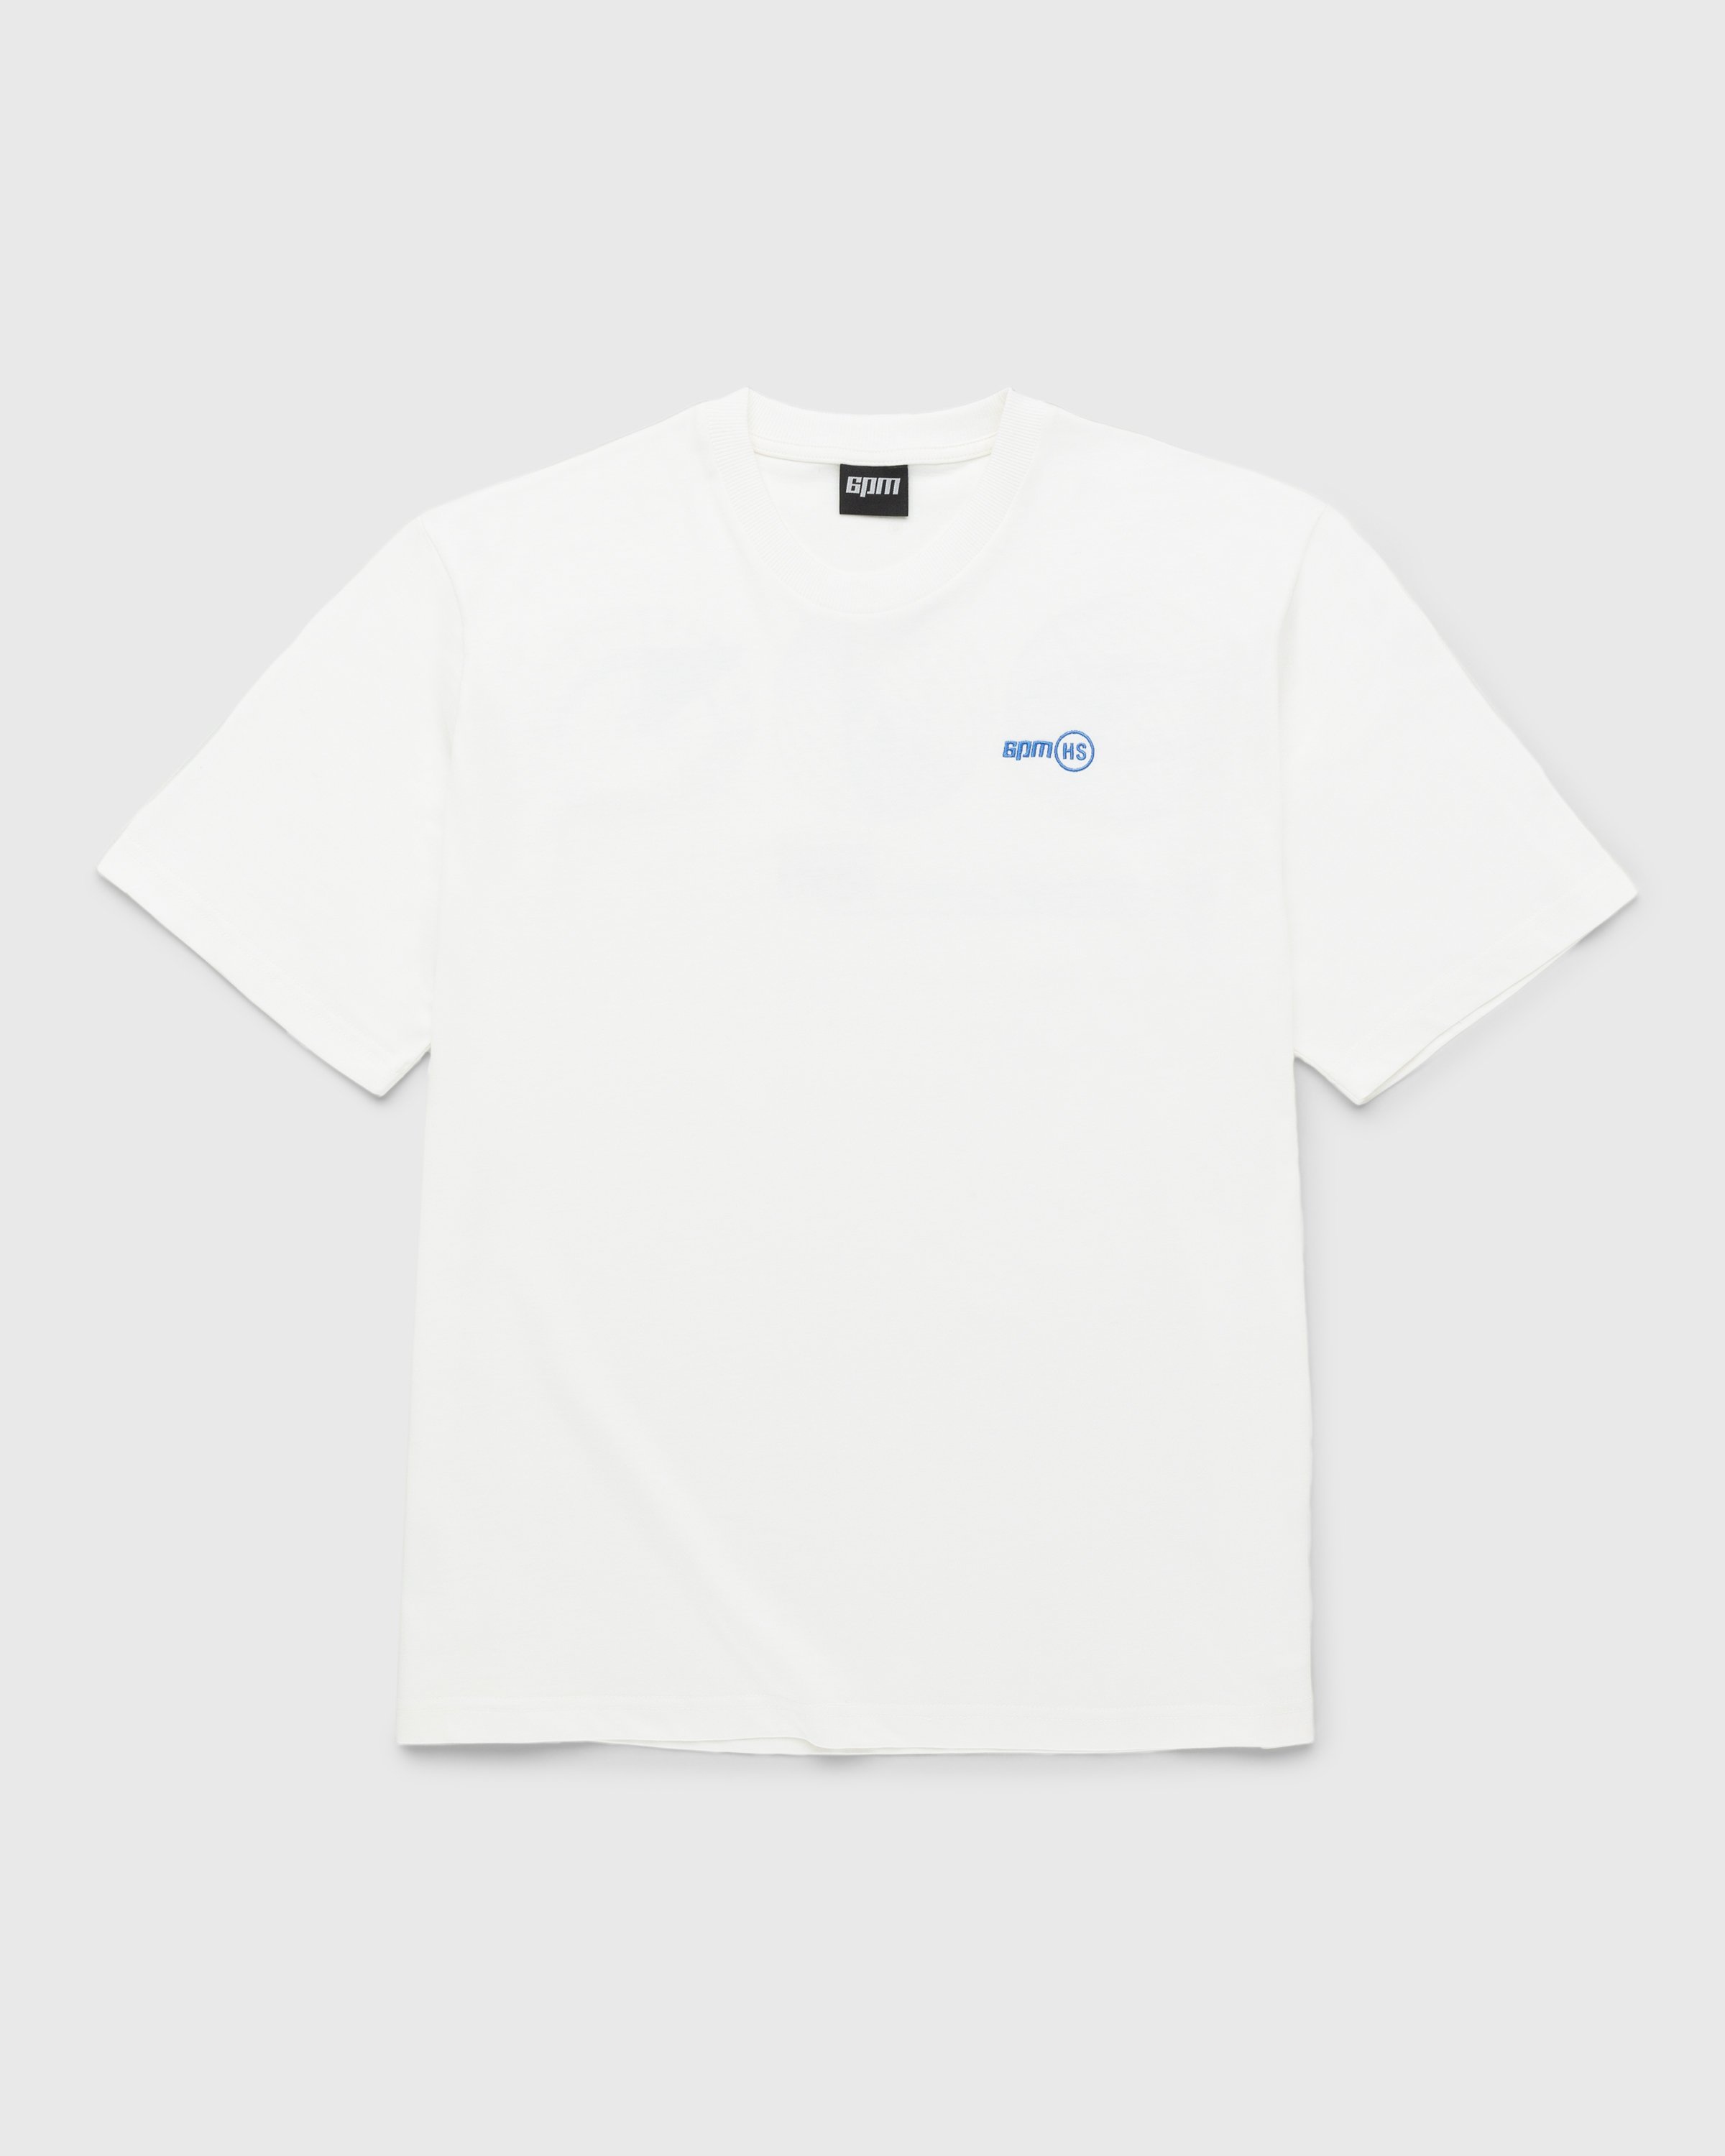 6PM x Highsnobiety - BERLIN, BERLIN 3 Only Wear After 6PM T-Shirt White - Clothing - White - Image 2